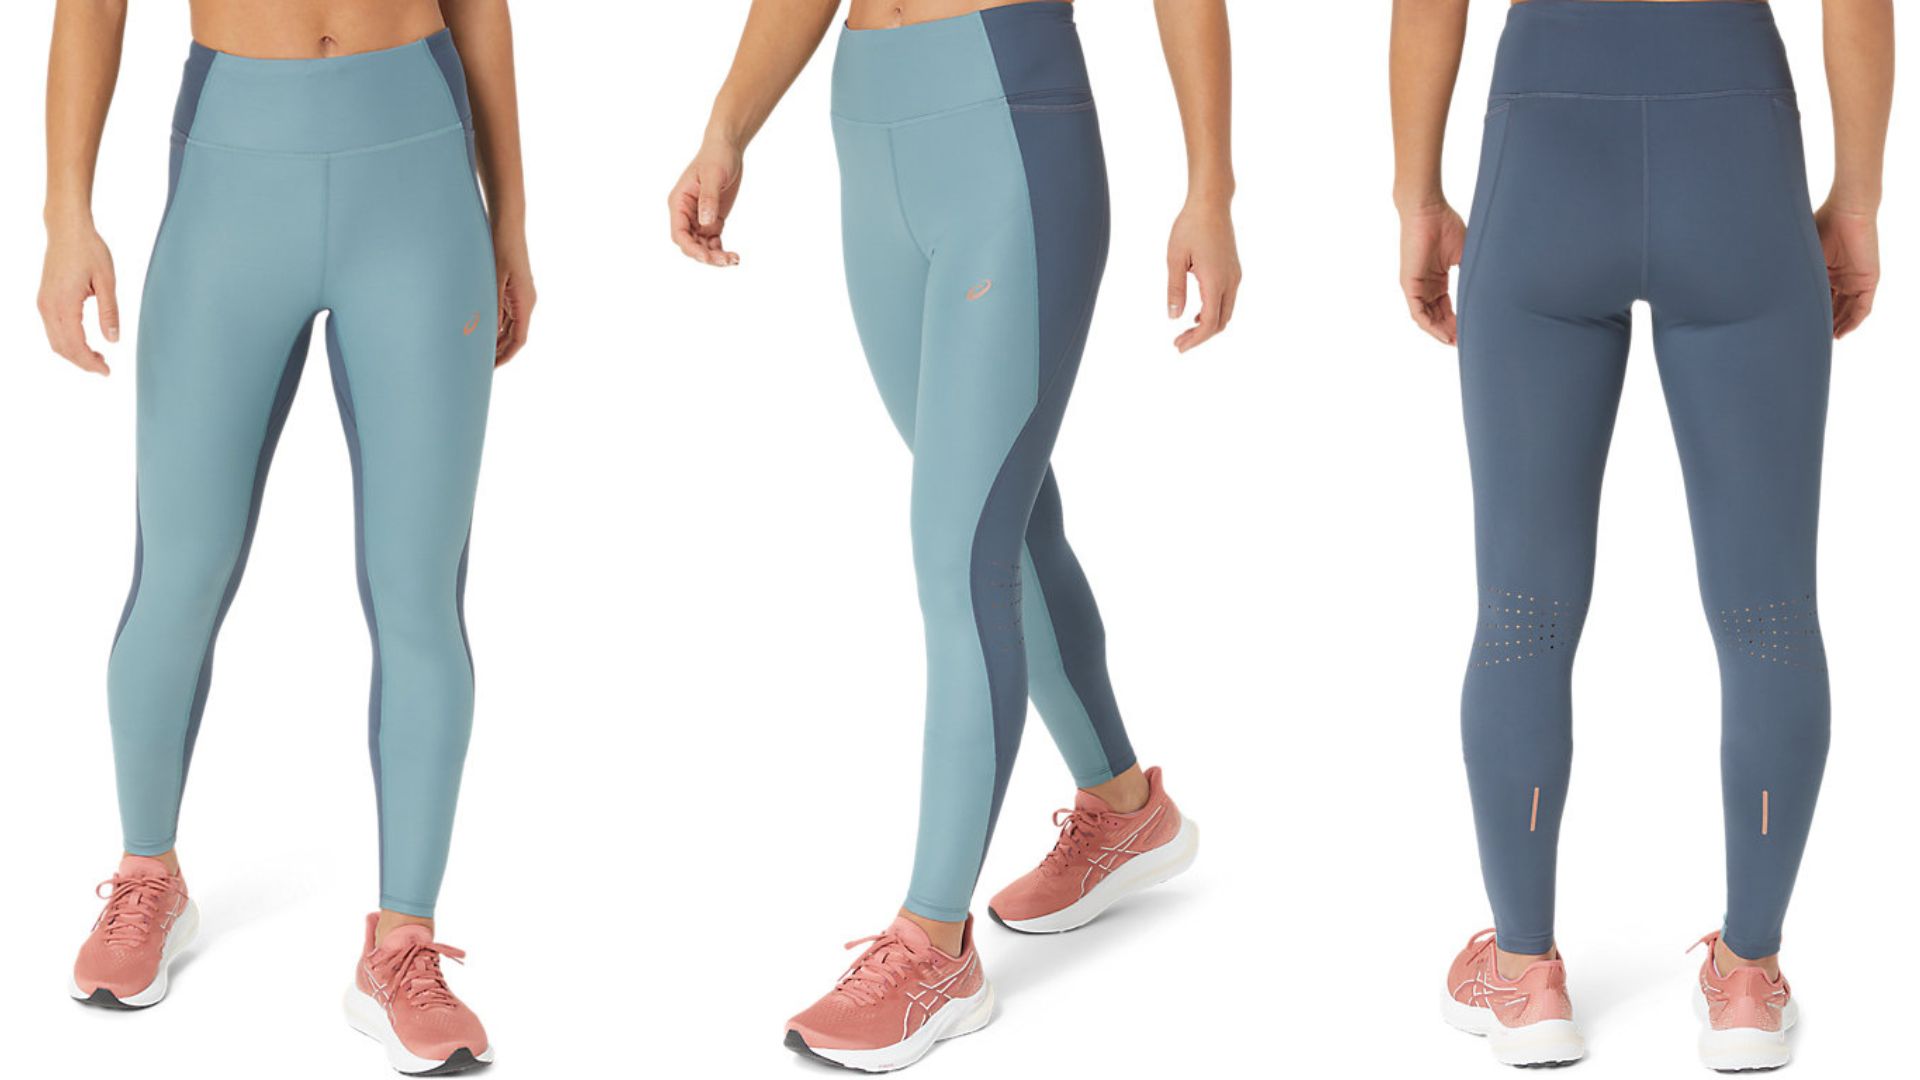 Women's Asics Nagino Run Tight in foggy teal/tarmac worn by model, front, side and back views